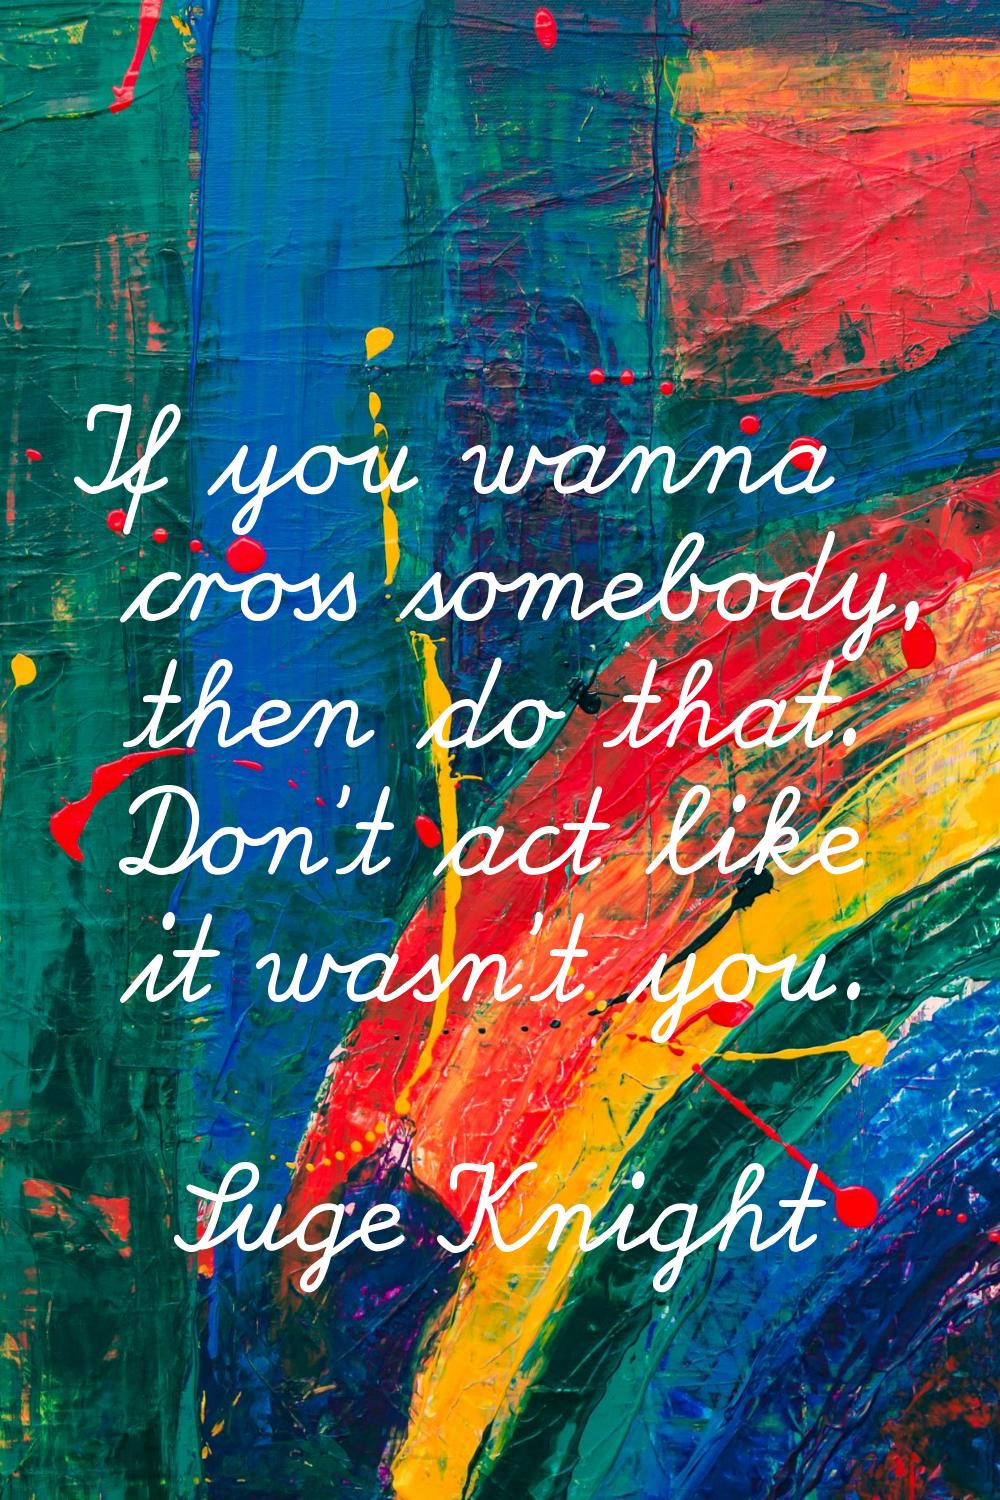 If you wanna cross somebody, then do that. Don't act like it wasn't you.